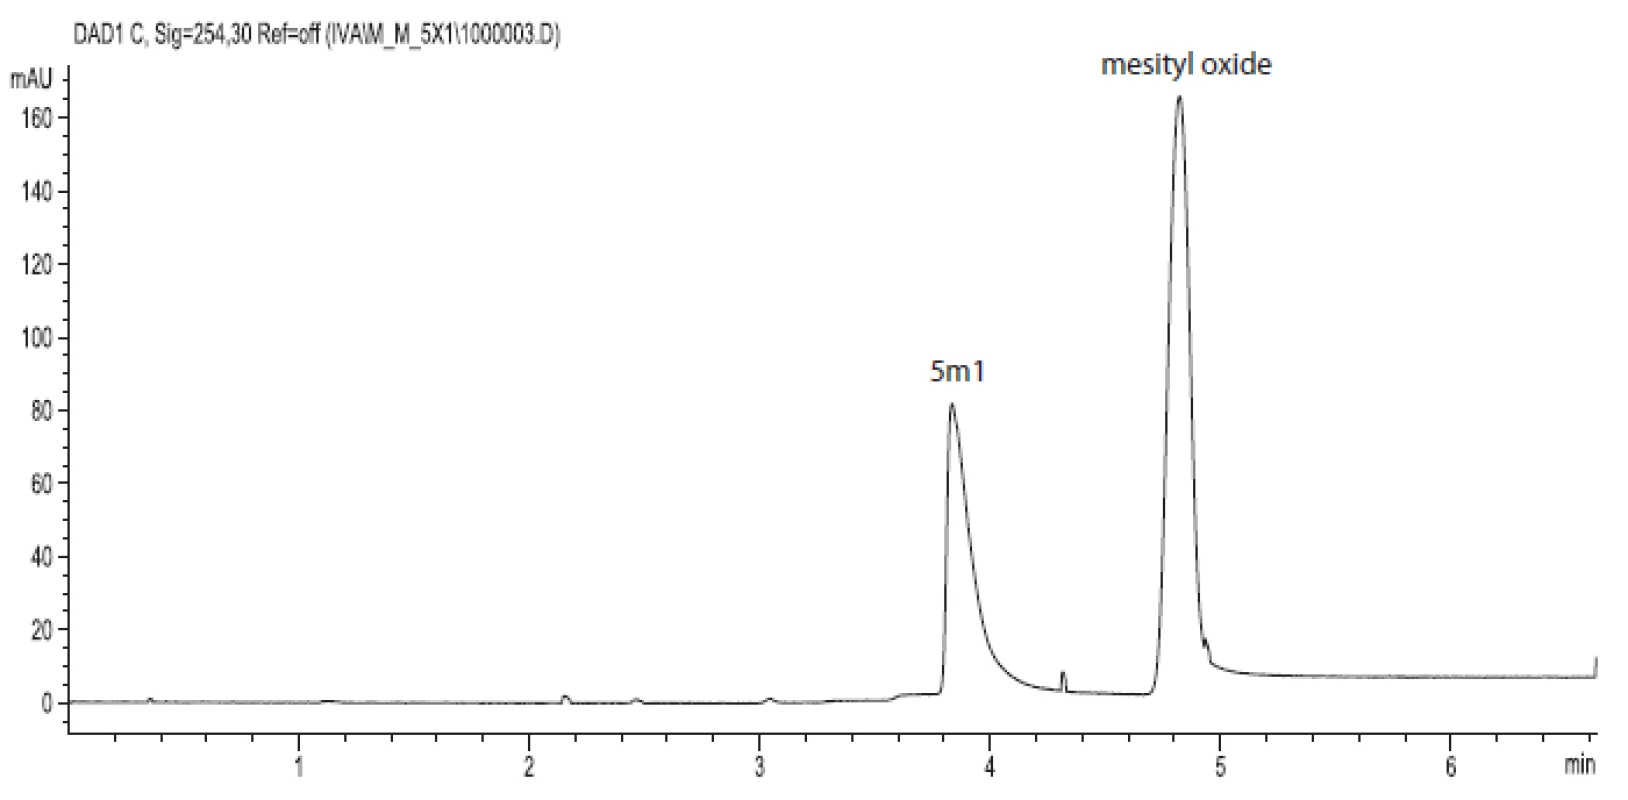 Electropherogram of compound 5m1 (7.5.10&lt;sup&gt;–4&lt;/sup&gt; mol.l&lt;sup&gt;–1&lt;/sup&gt;) and mesityl oxide (2.10&lt;sup&gt;–6&lt;/sup&gt; mol.l&lt;sup&gt;–1&lt;/sup&gt;) in MOPSO/NaOH background electrolyte (pH = 6.70, I = 0.01 mol.l&lt;sup&gt;–1&lt;/sup&gt;), injection by pressure 40 mbar for 4 s, applied voltage +15 kV, temperature 25 °C, detection at 254 nm